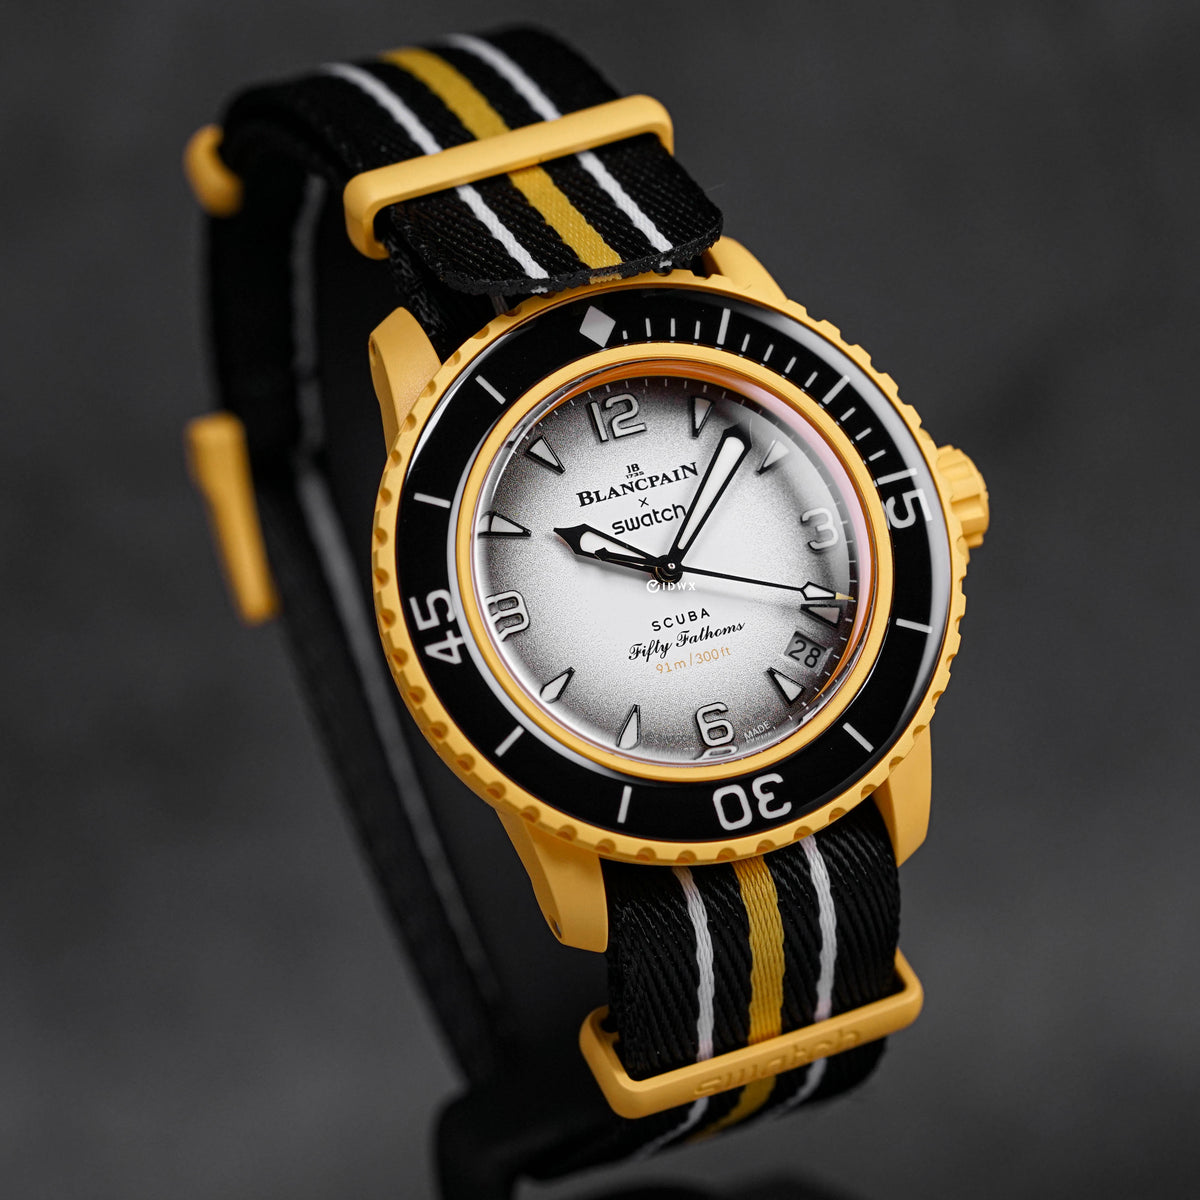 BLANCPAIN X SWATCH PACIFIC